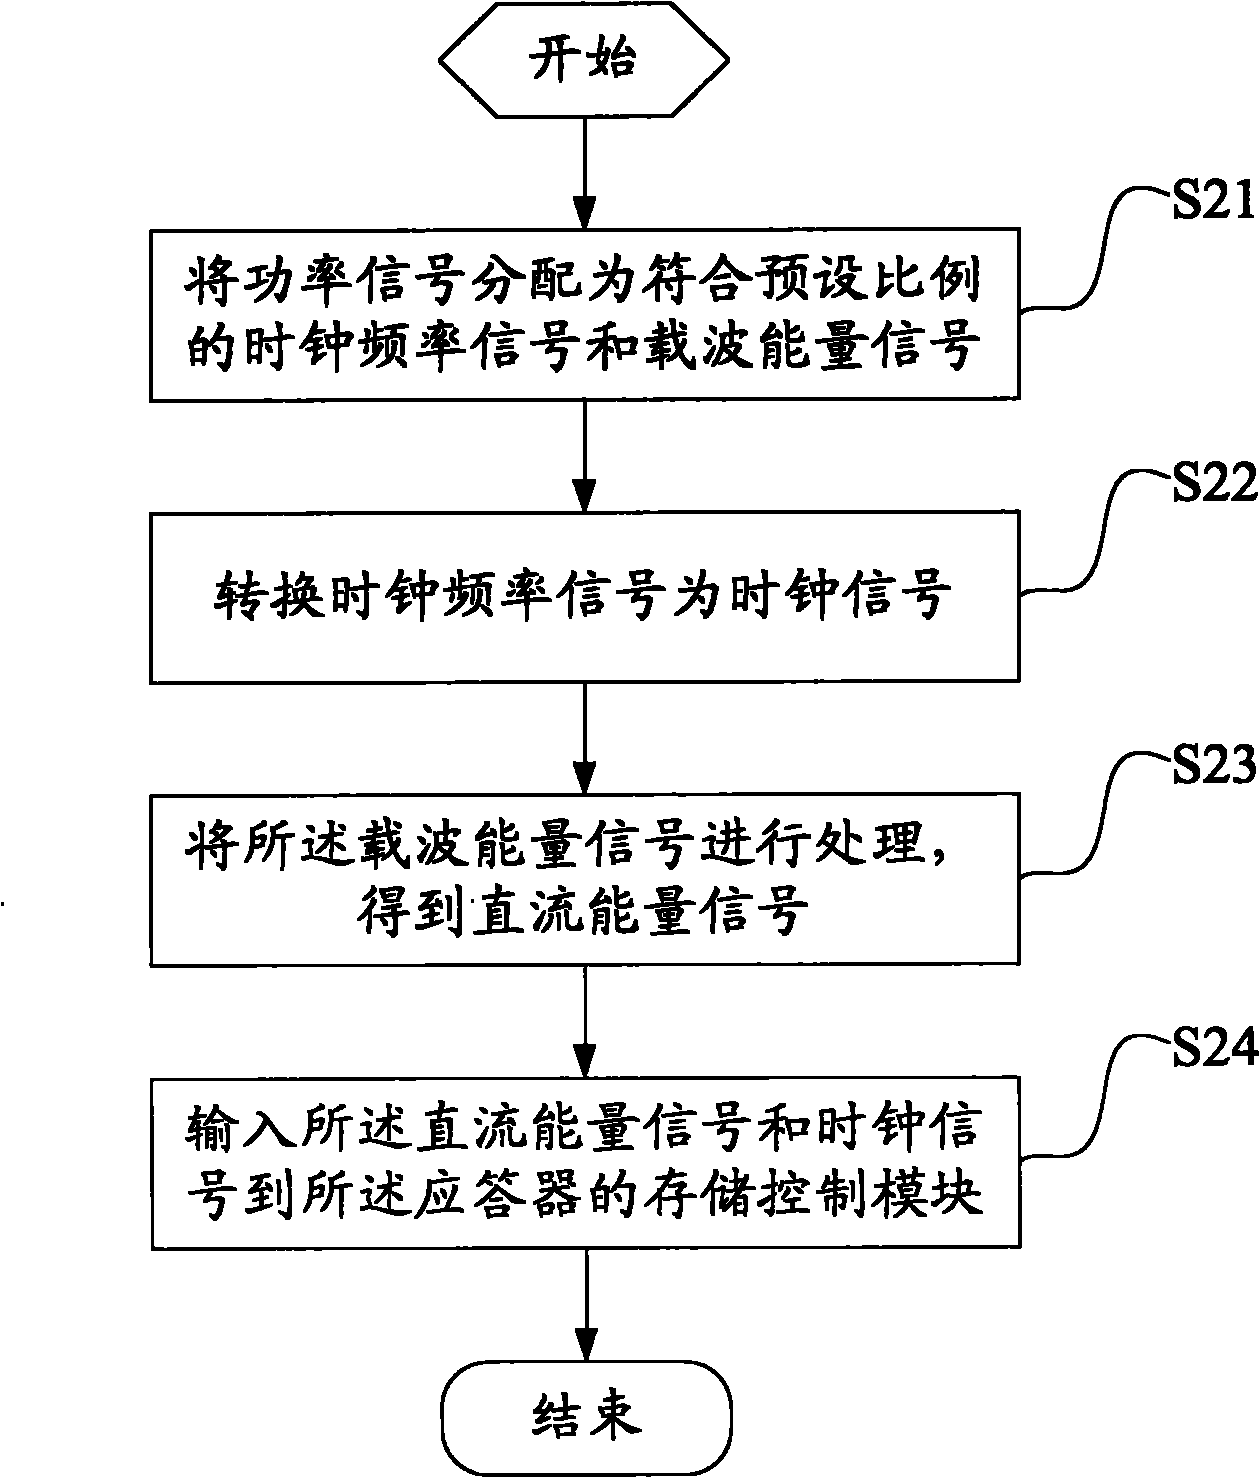 Signal processing method and device applied to responder and responder